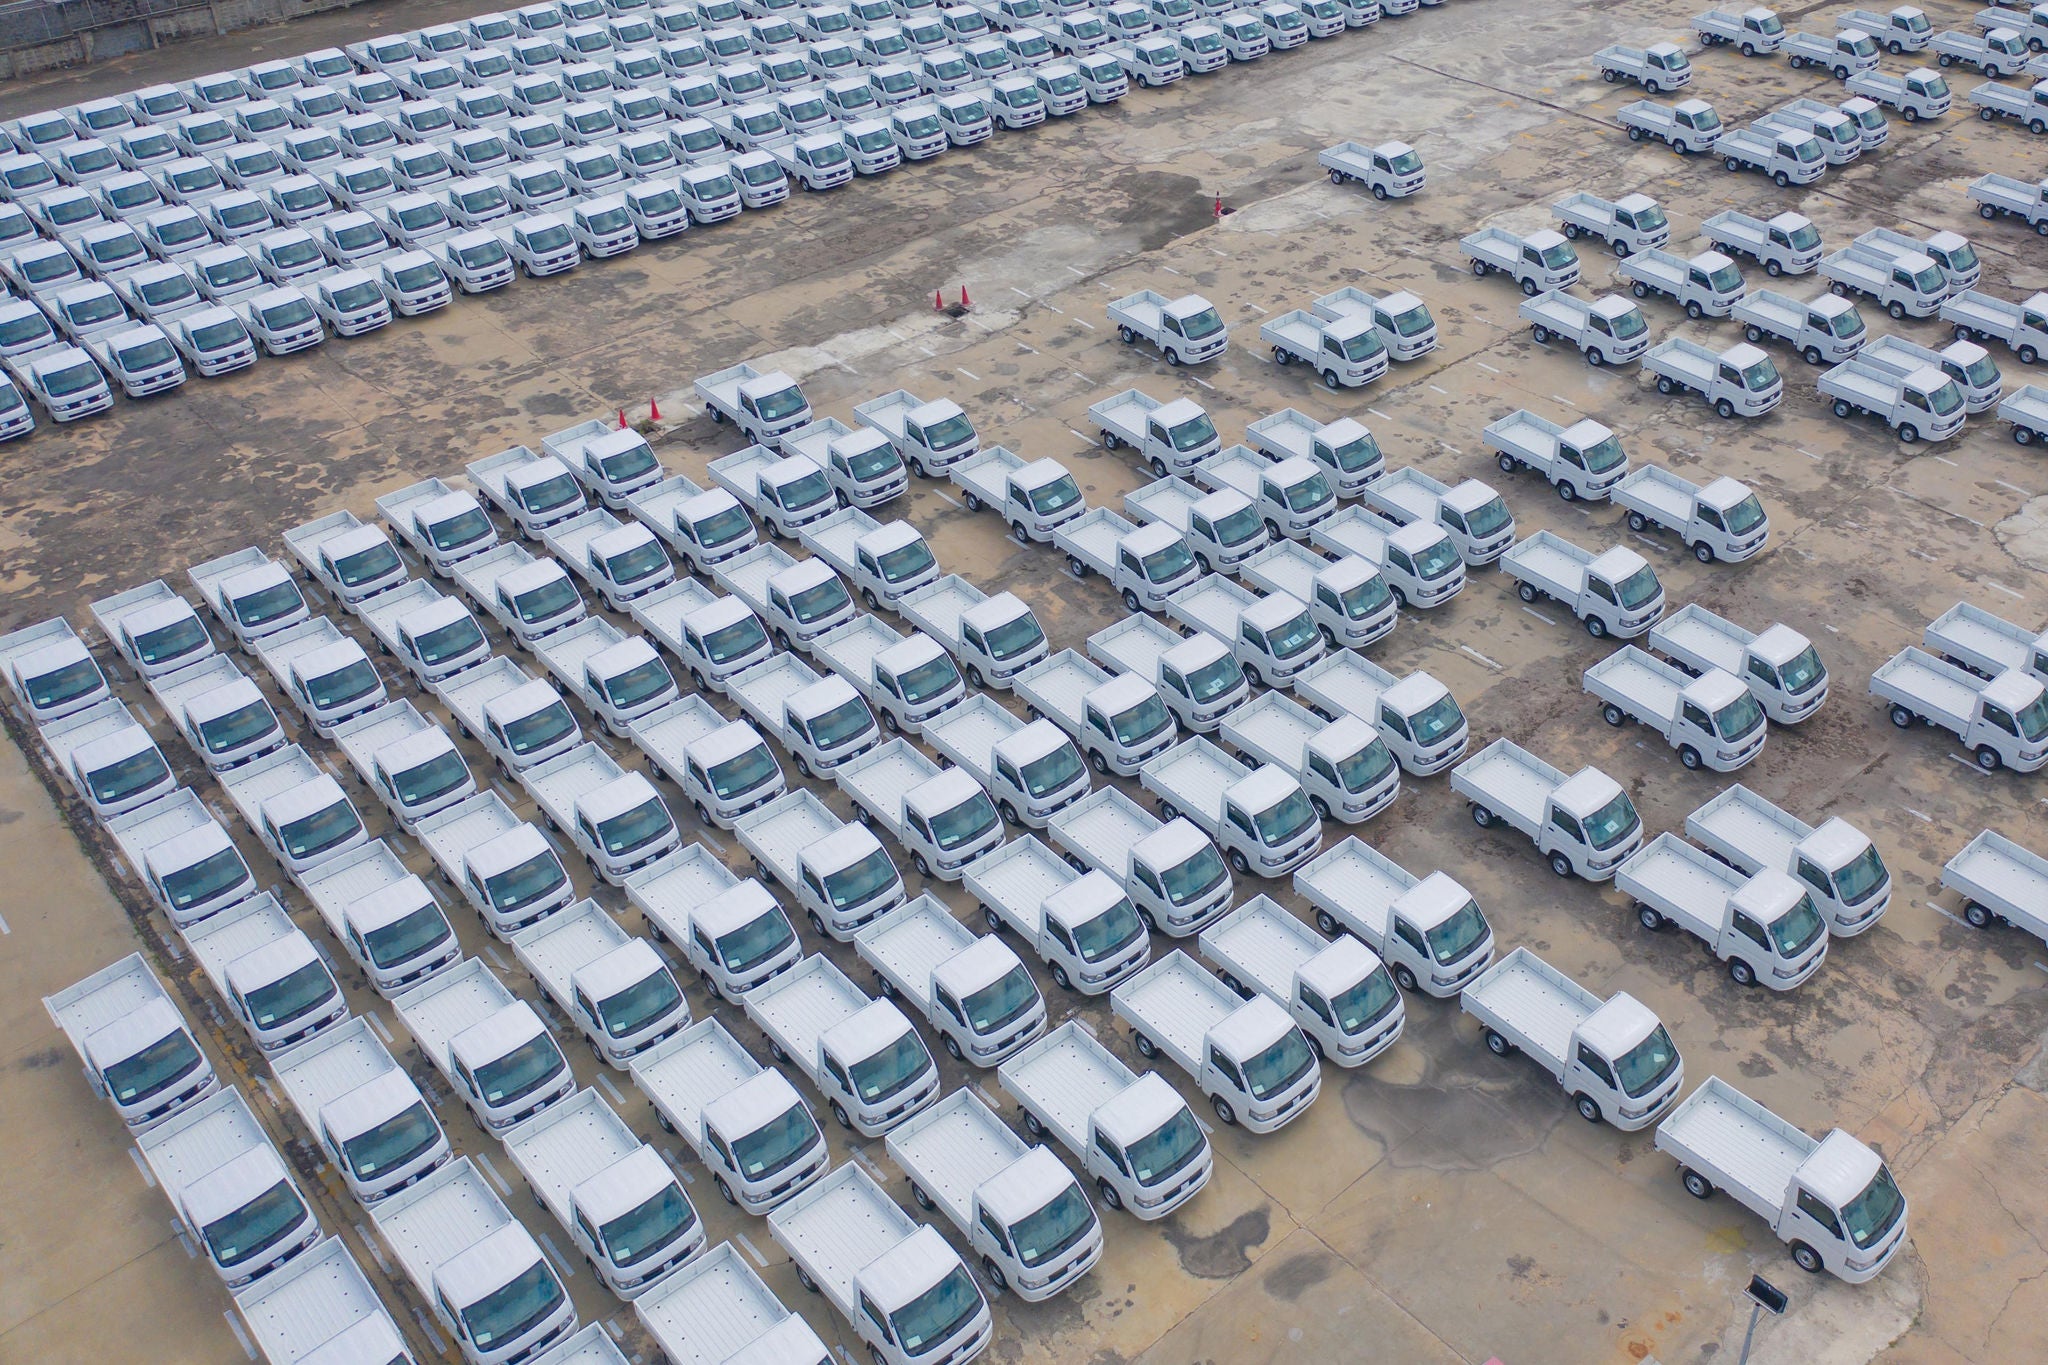 Aerial top view of new truck cars parking for sale stock lot row, dealer inventory import and export business commercial, Automobile and automotive industry distribution logistic global transport